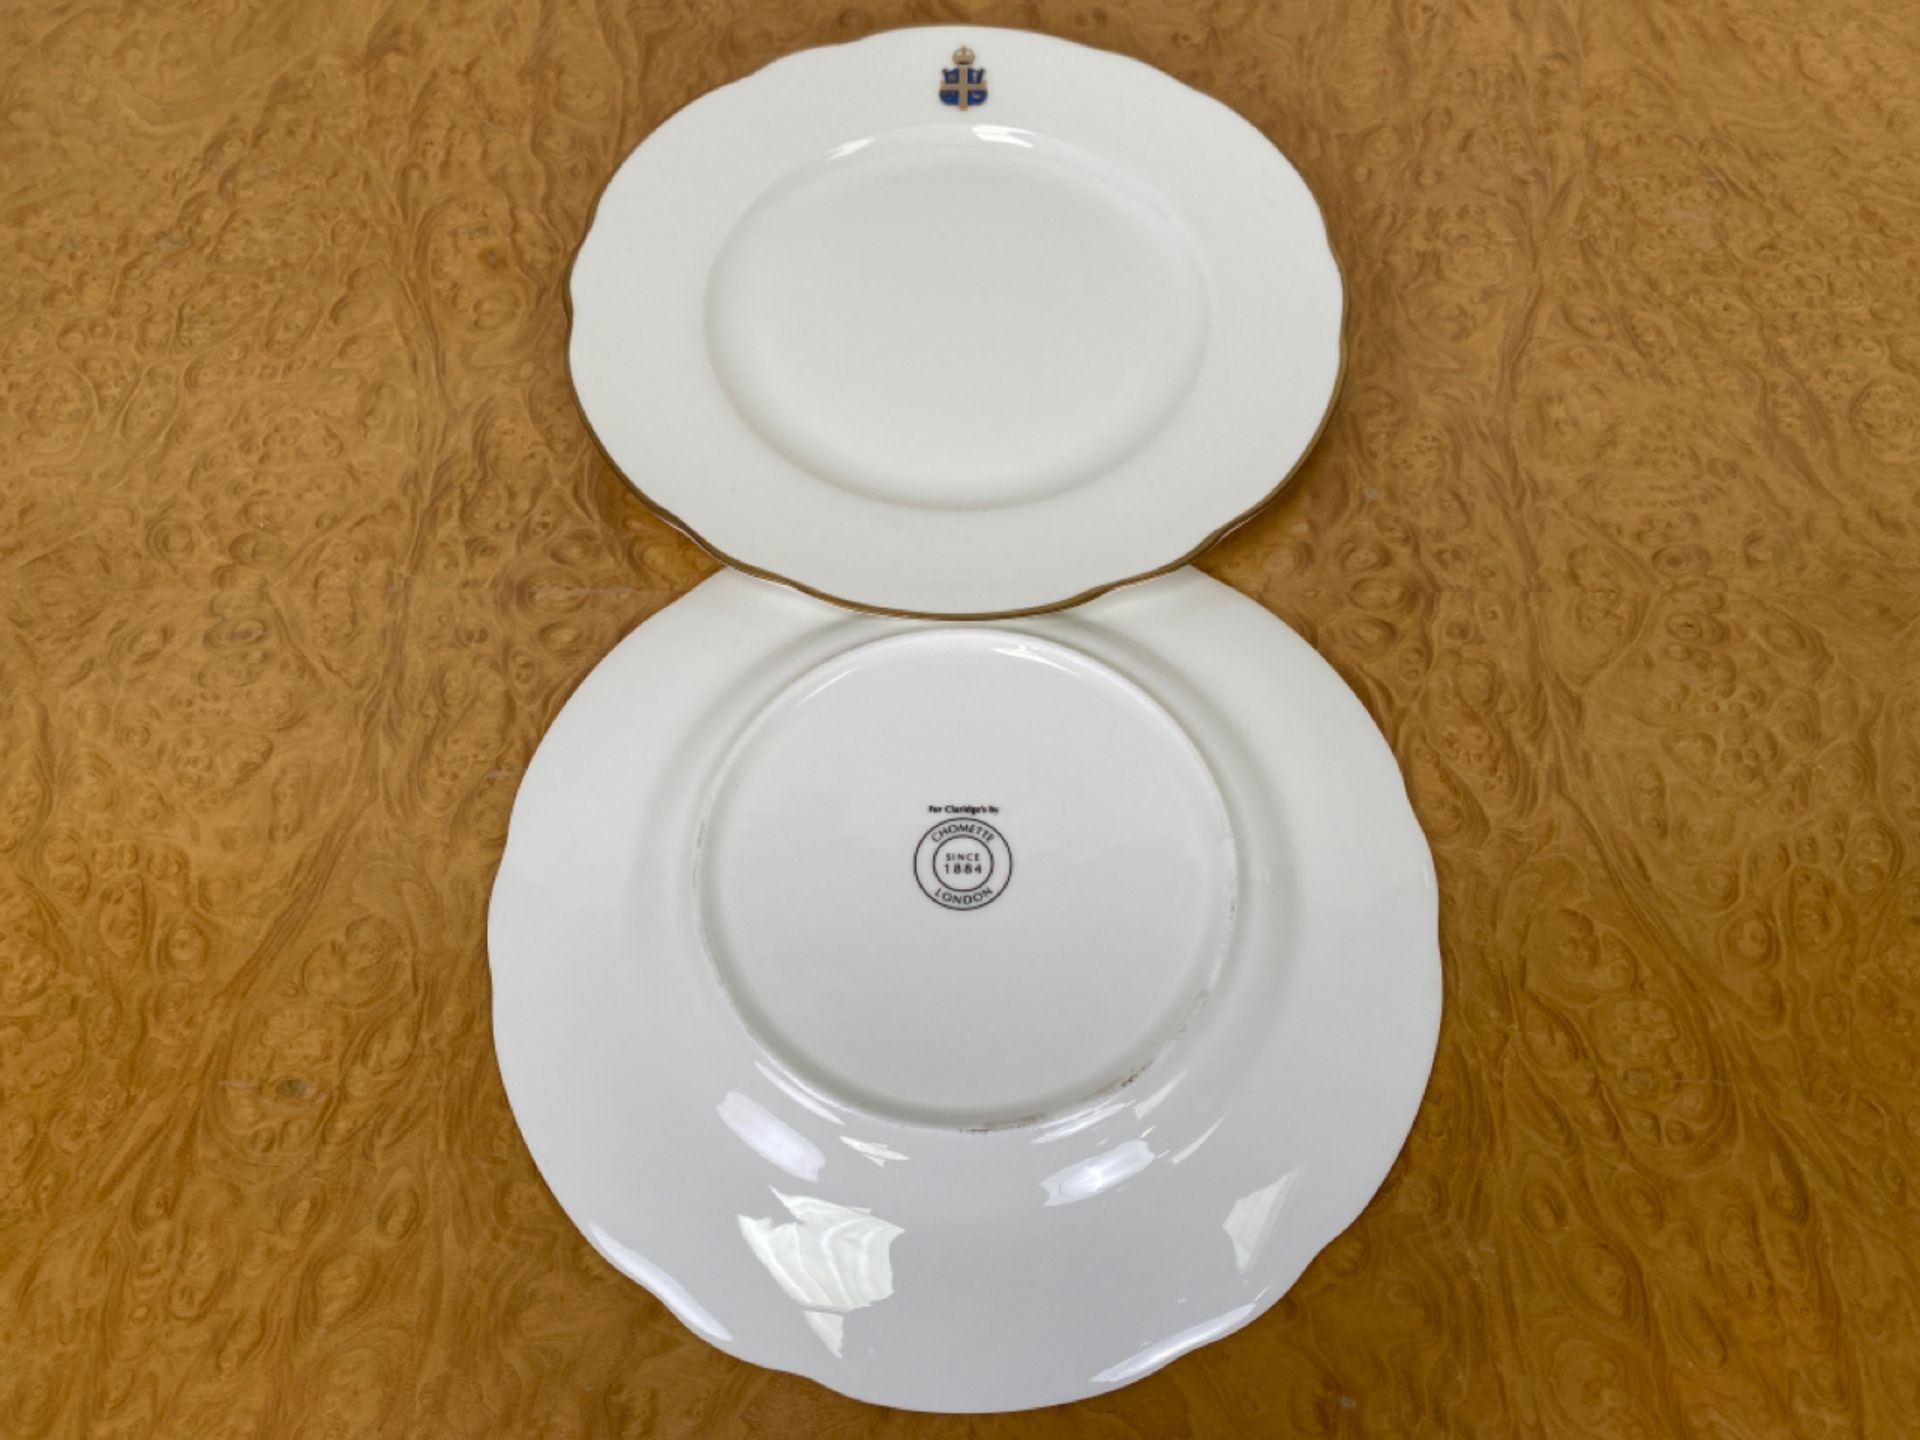 50 x Crested Plates for Claridge's by Chommette 1884 (25cm) - Image 6 of 6